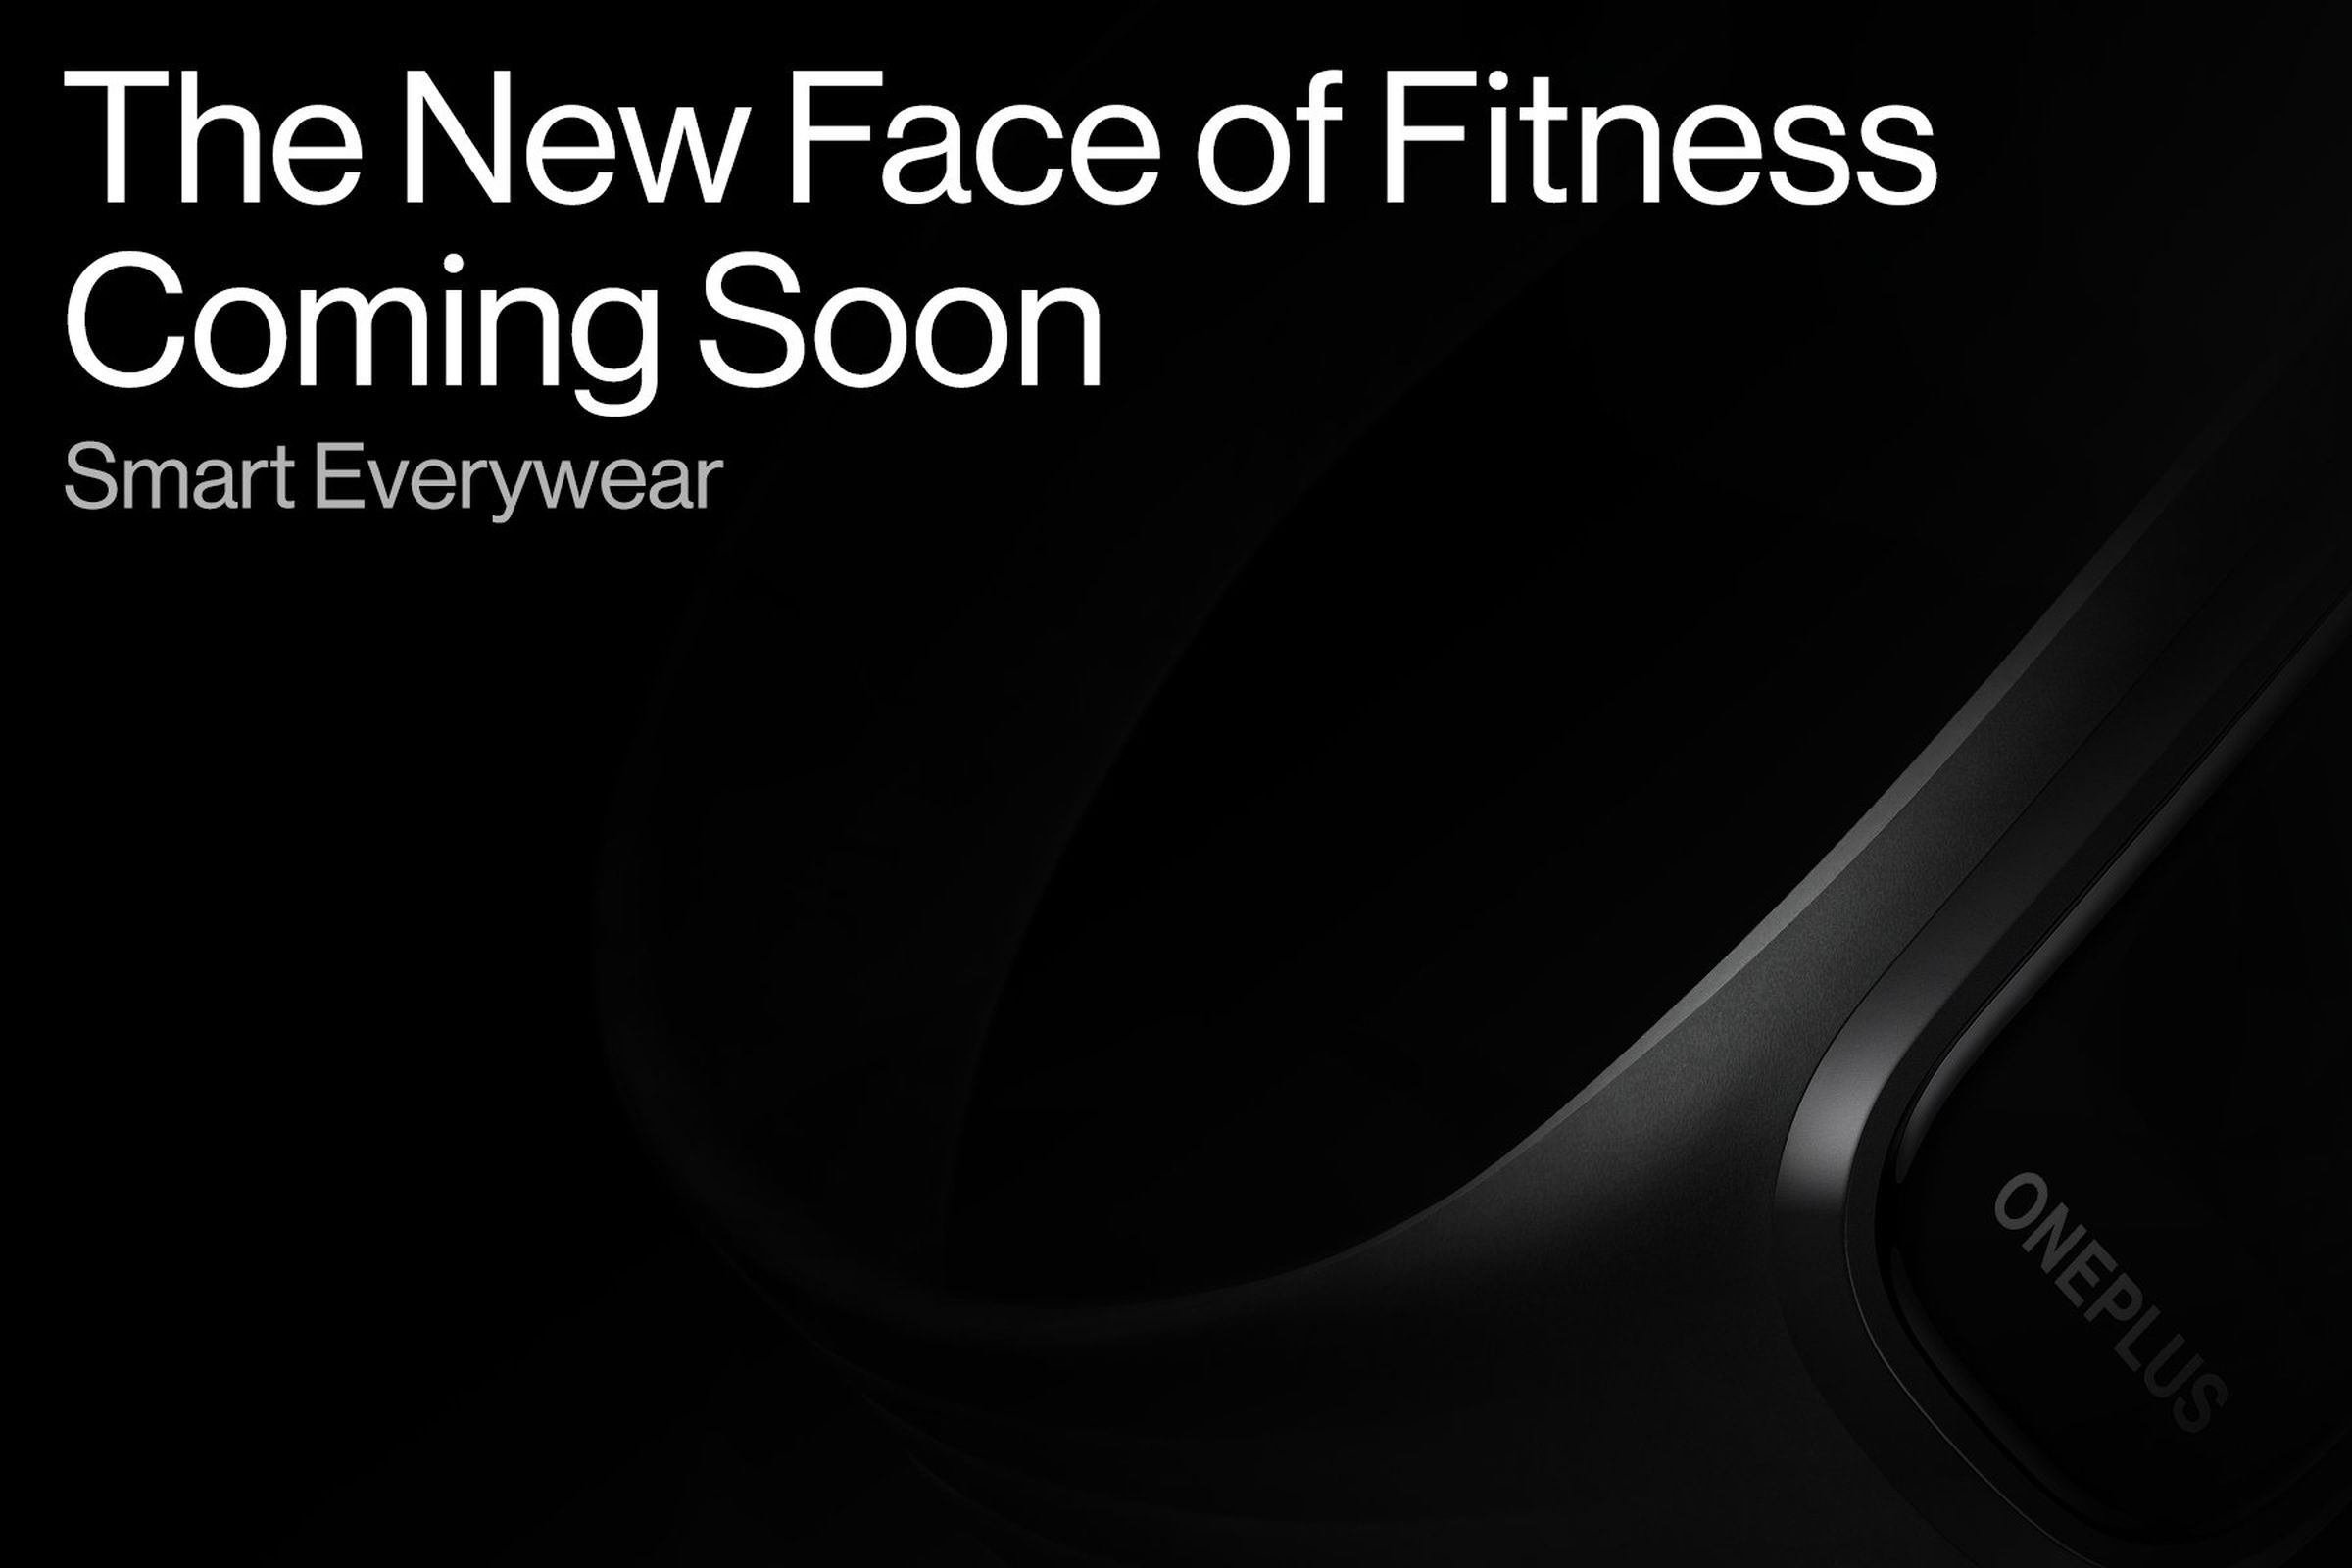 A teaser image from OnePlus India suggests it has a fitness tracker on the way soon.